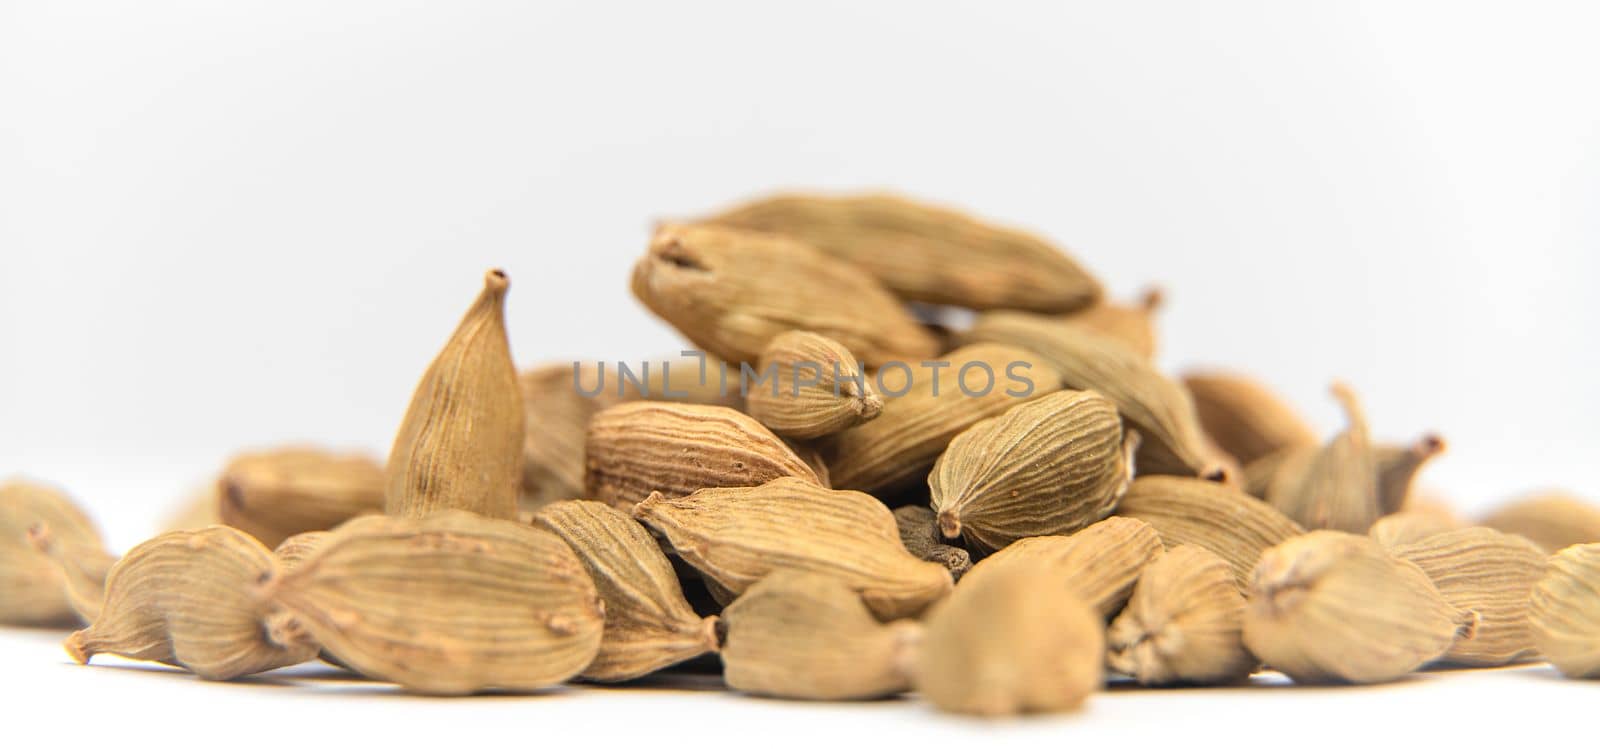 Cardamon seeds on a white background.